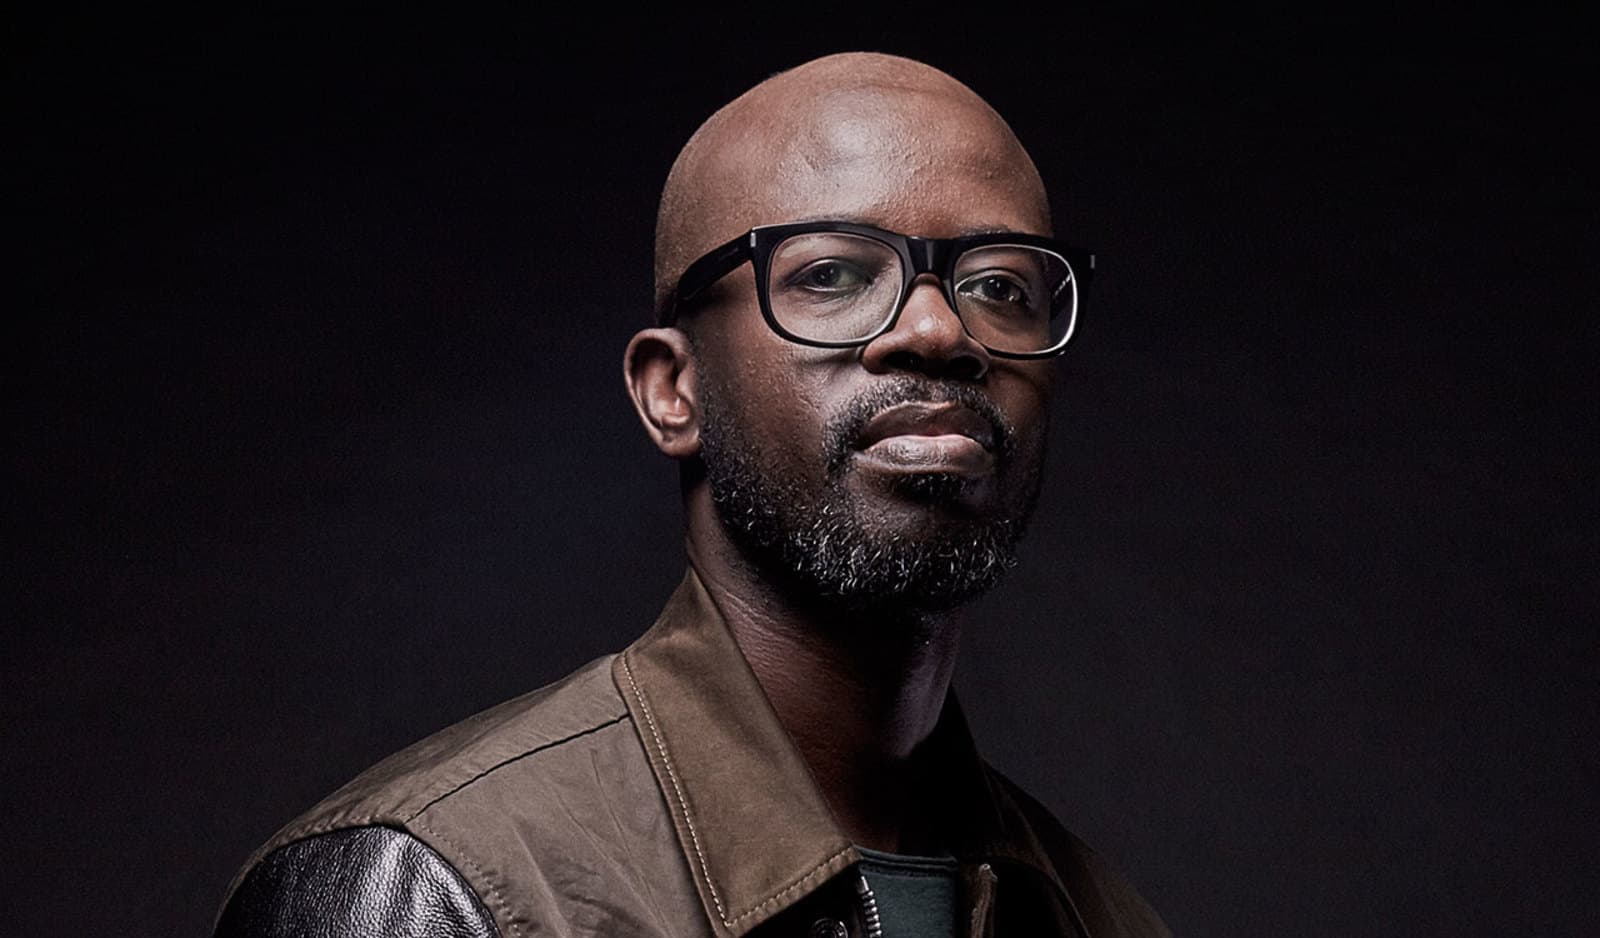 Black Coffee shows viewers an inside look into the creation of his virtual reality avatar for PRISM